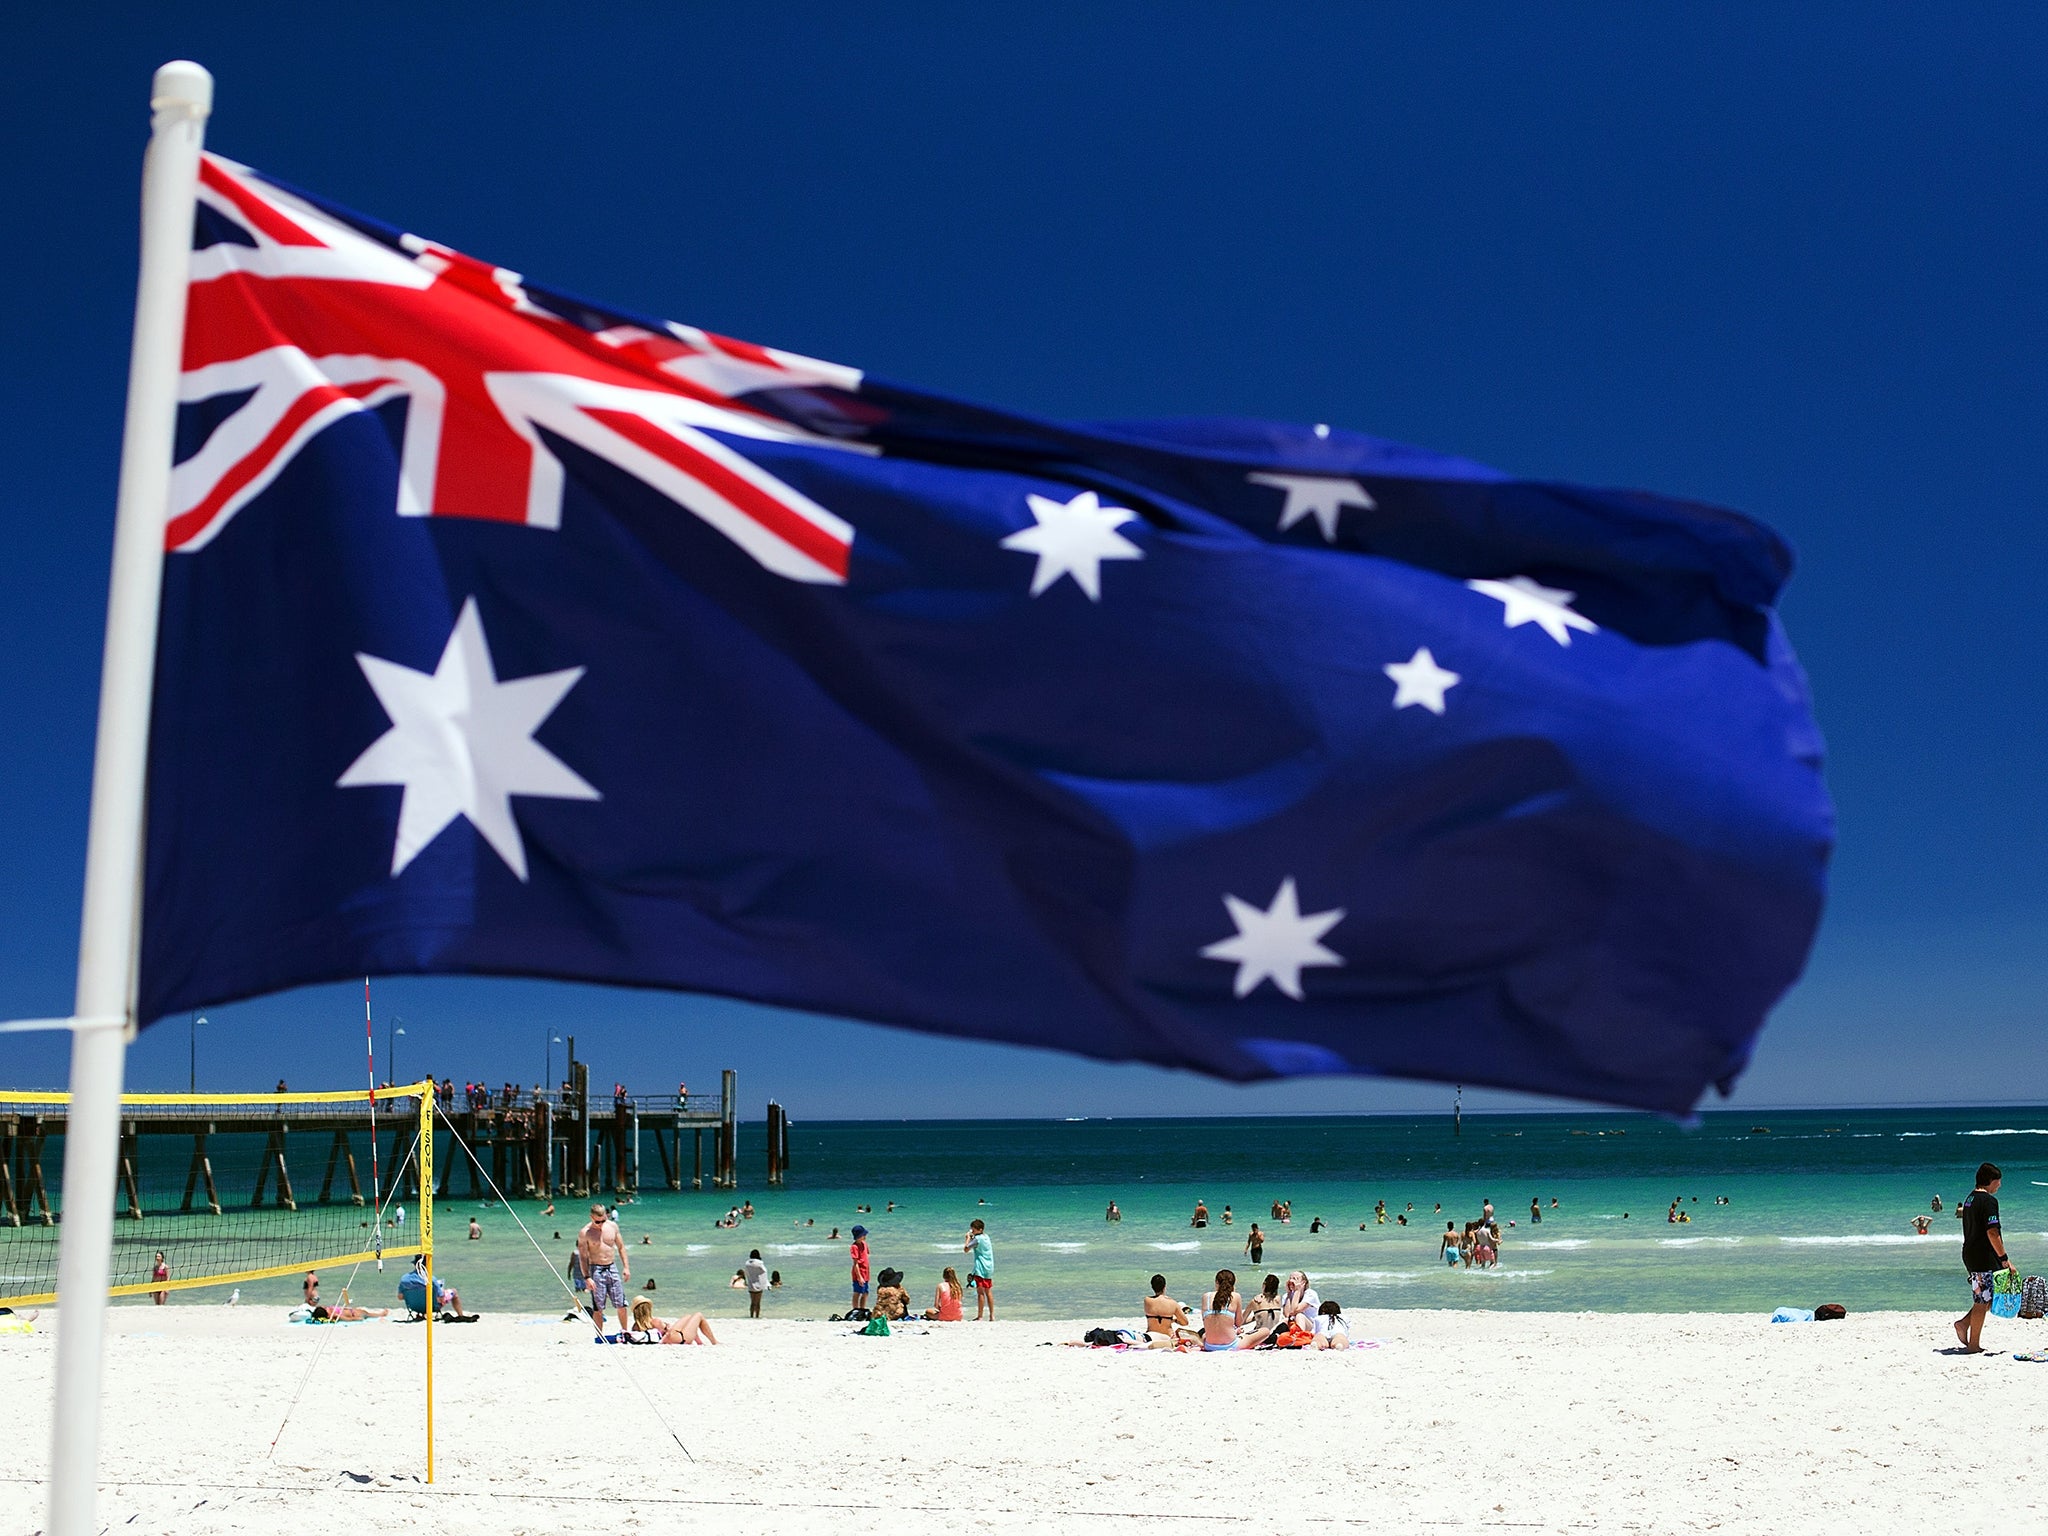 In Australia, more than one-quarter of the population is foreign-born